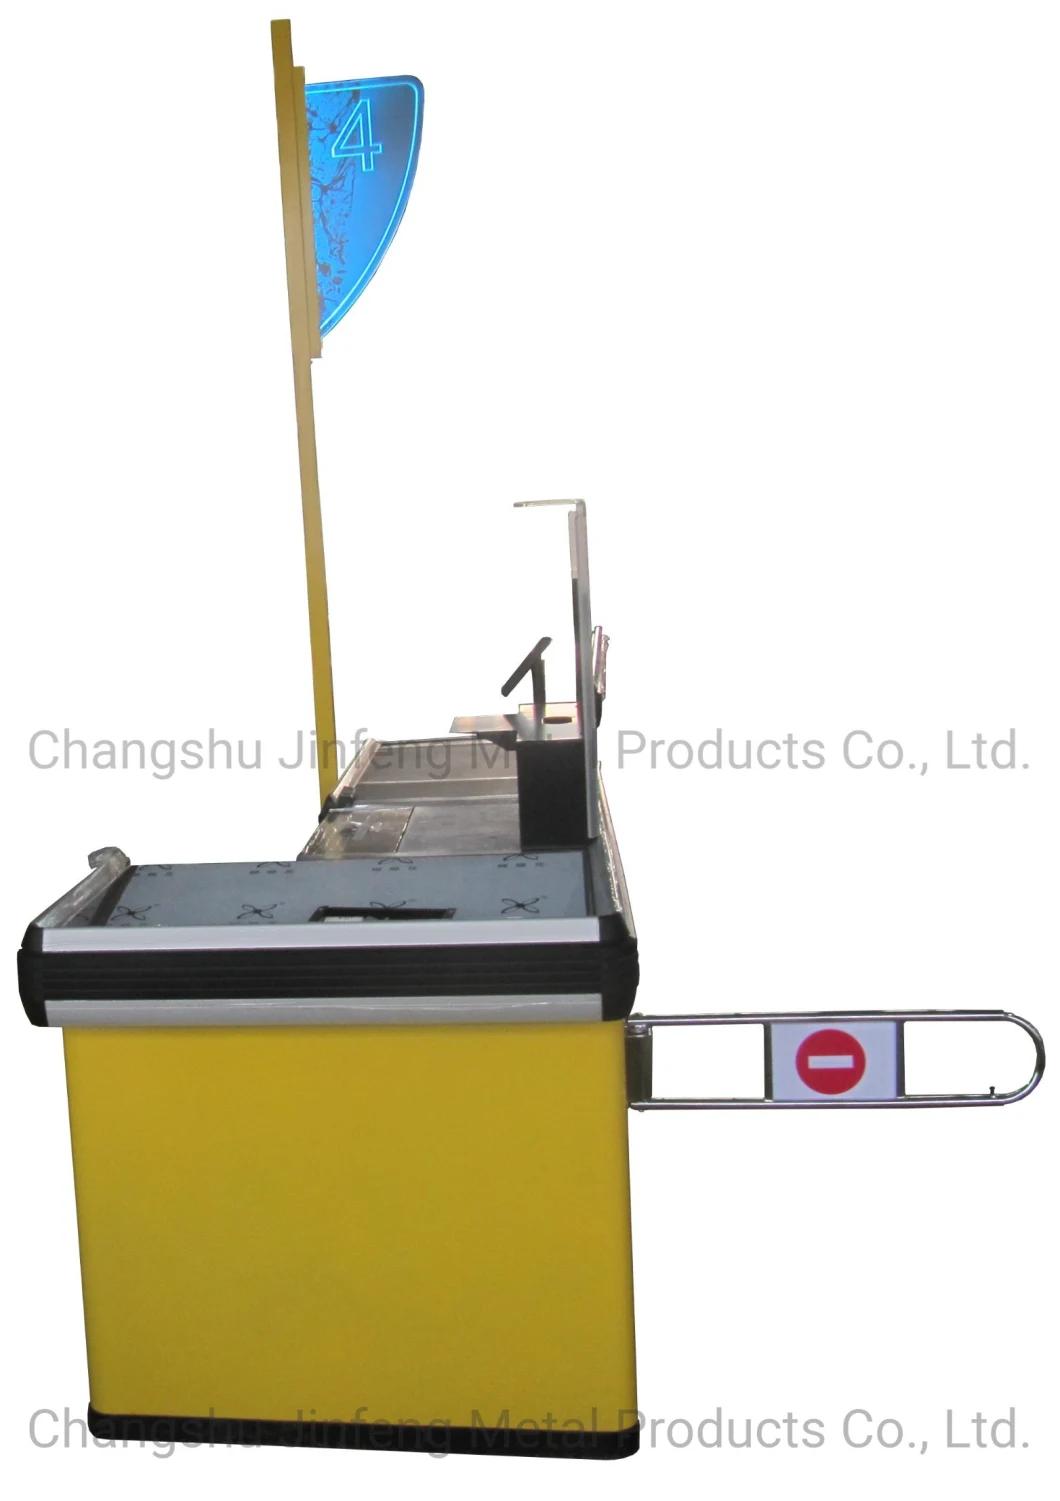 Supermarket Customized Metal Checkout Counter with Conveyor Belt and Light Box